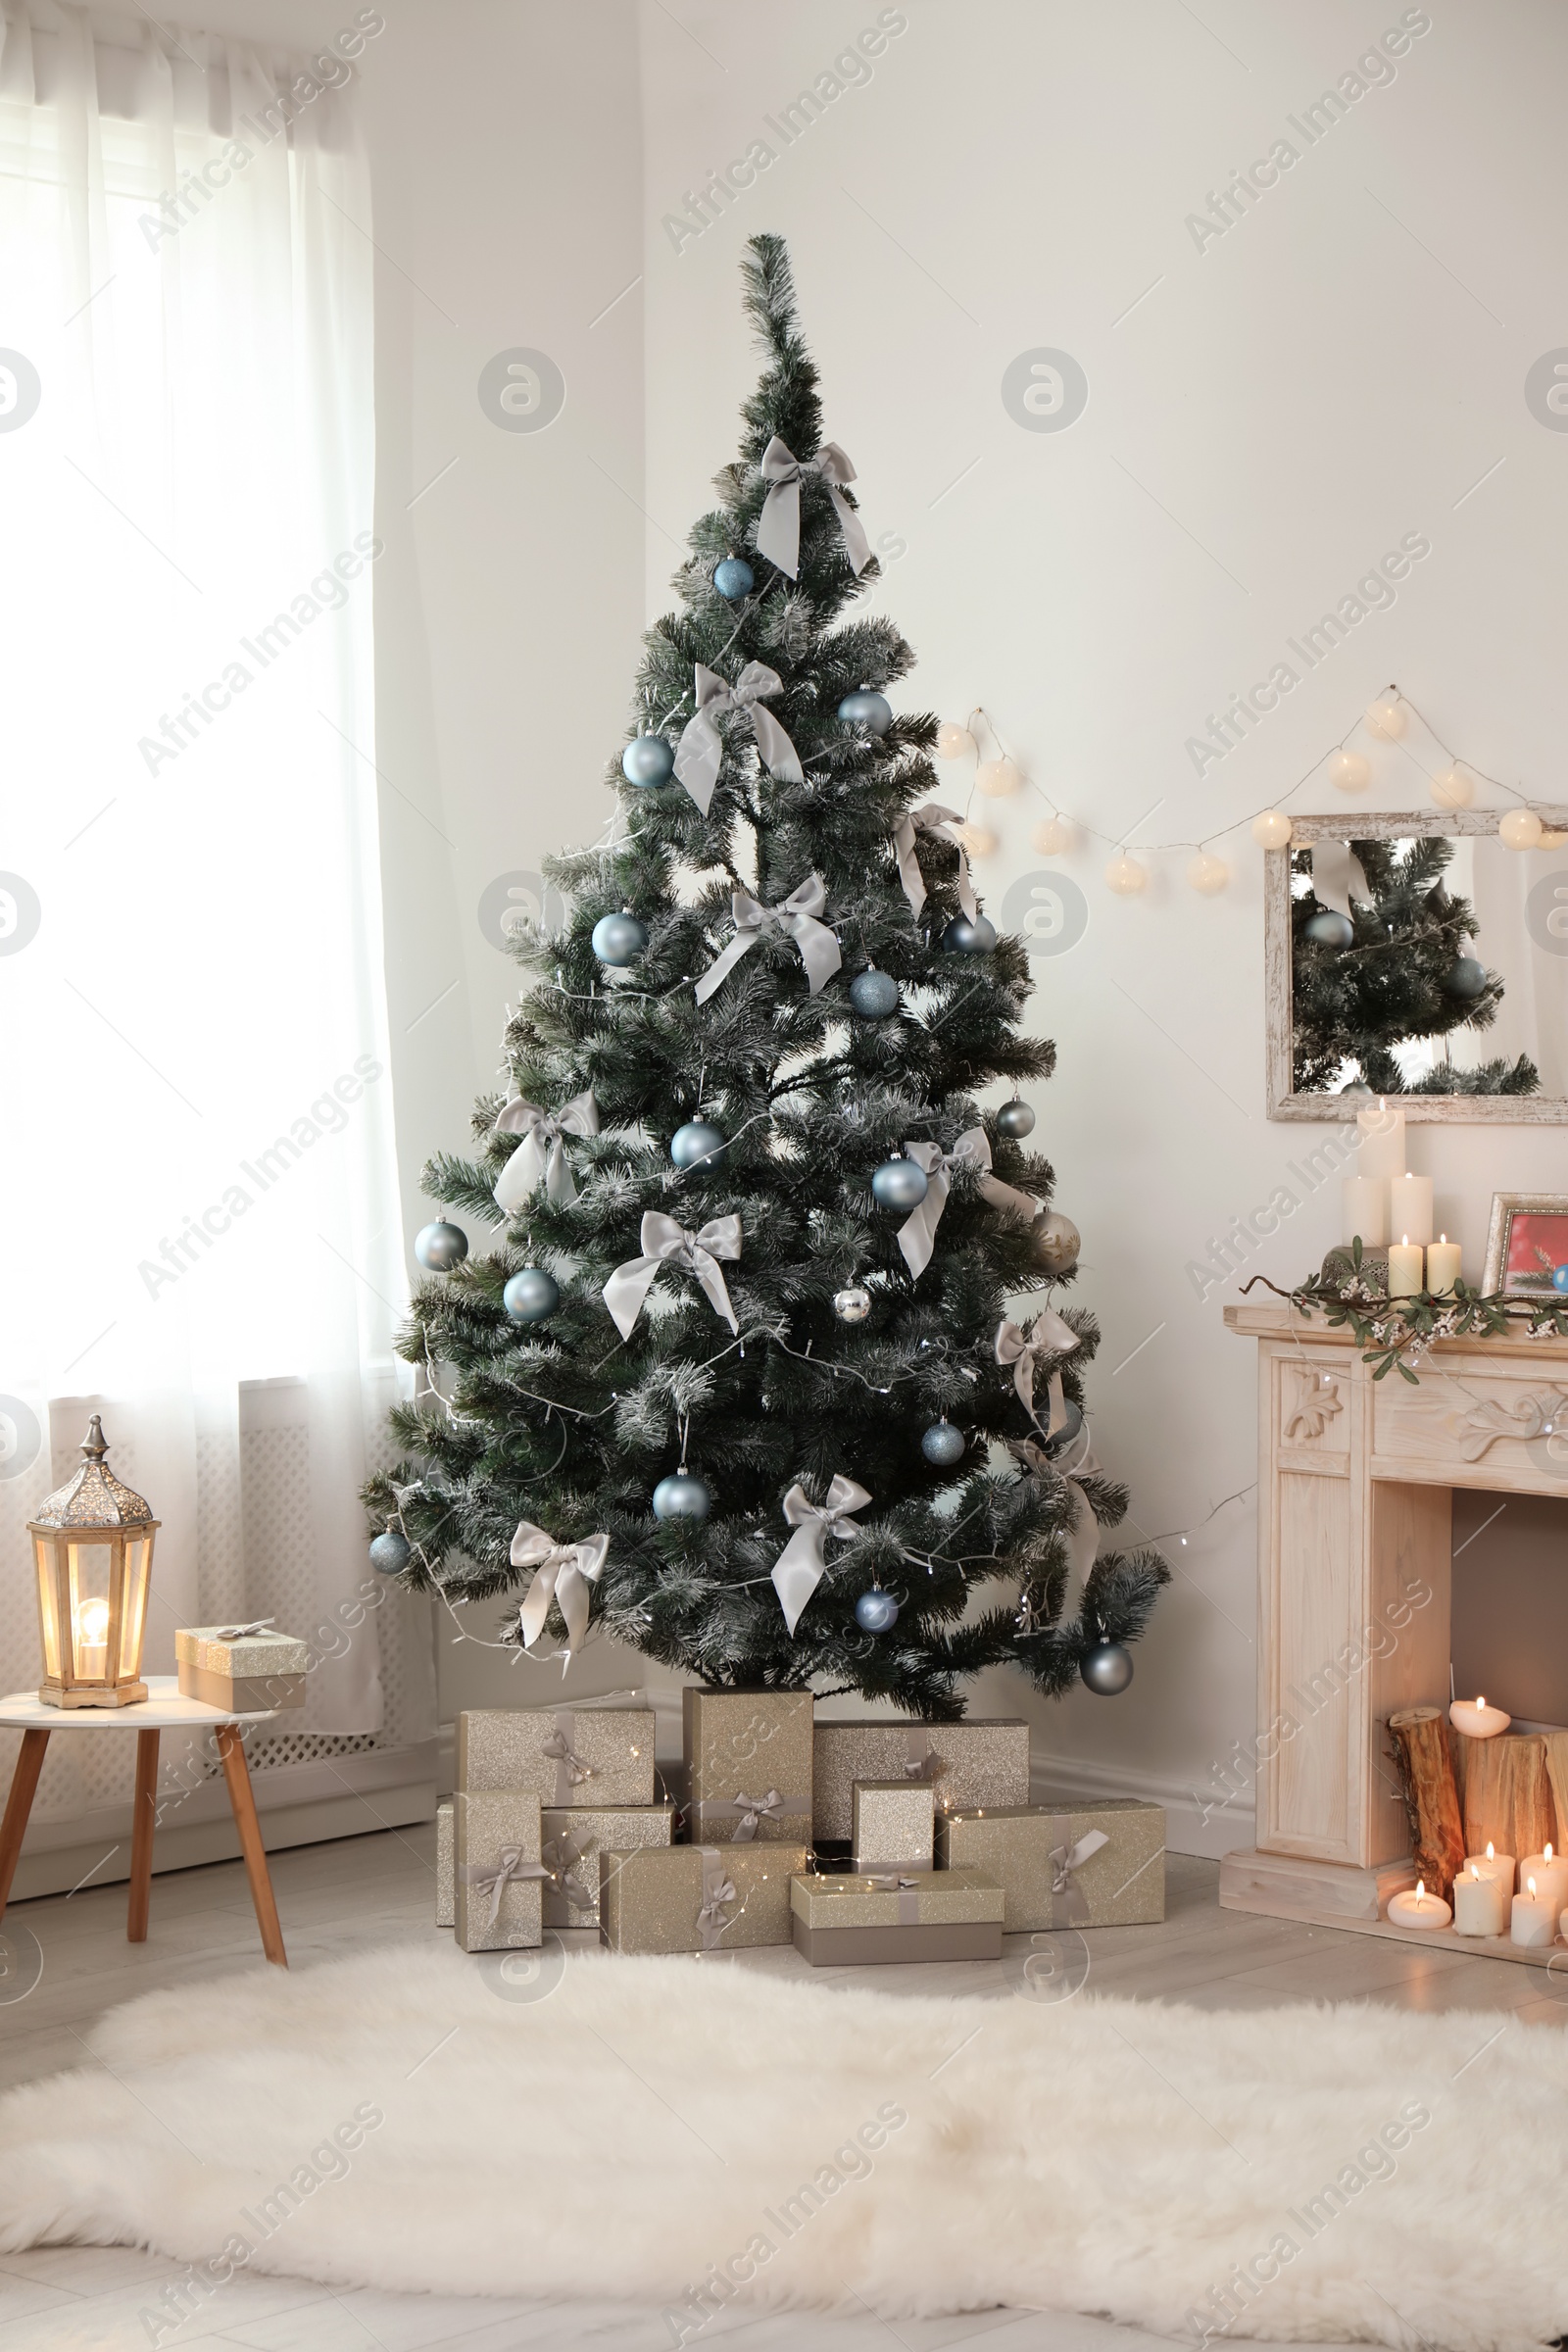 Photo of Decorated Christmas tree with gift boxes and fireplace in stylish living room interior